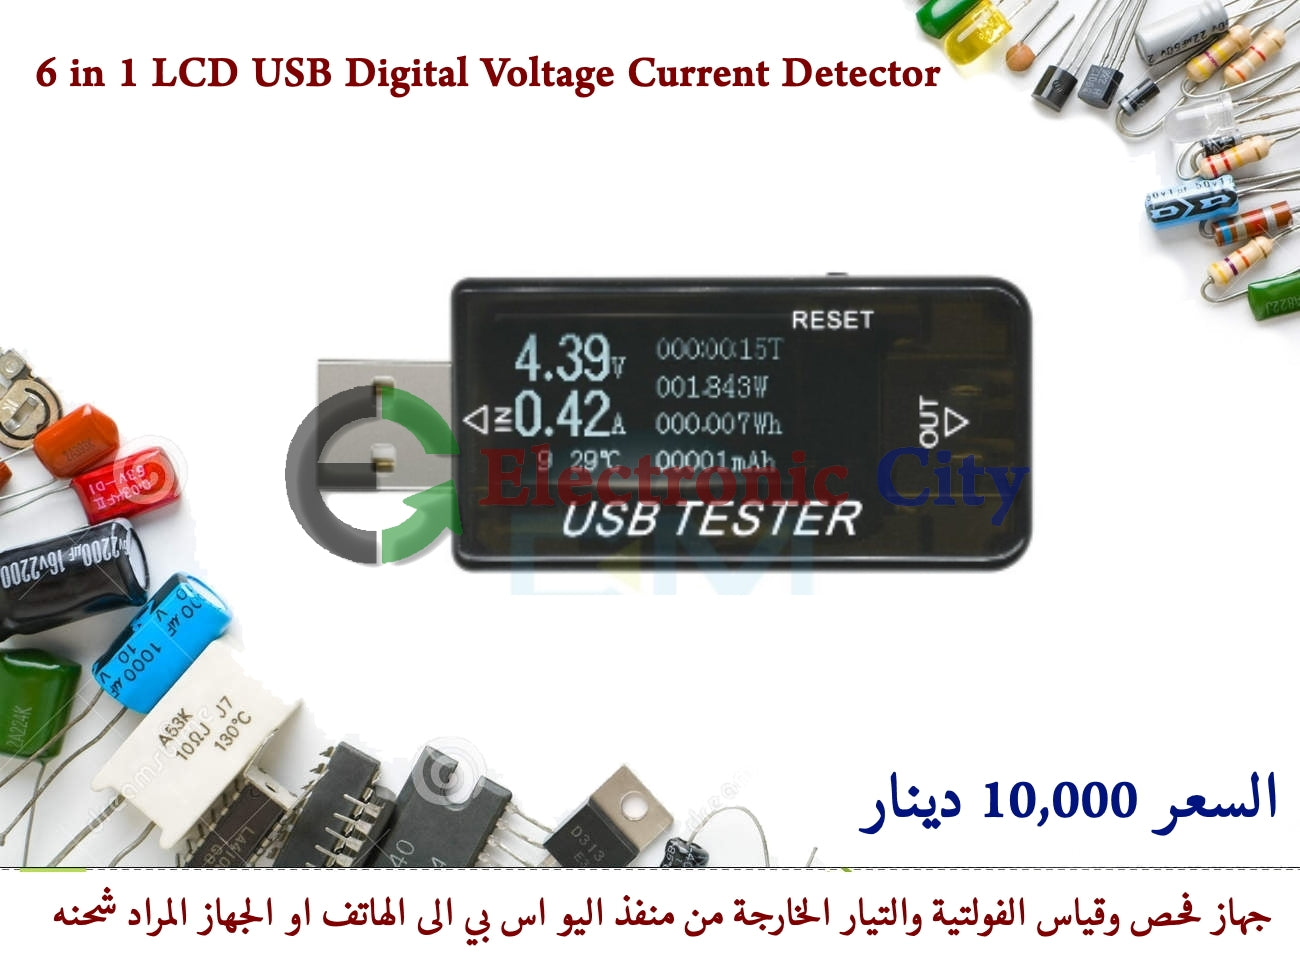 6 in 1 LCD USB Digital Voltage Current Detector #G7 X13280